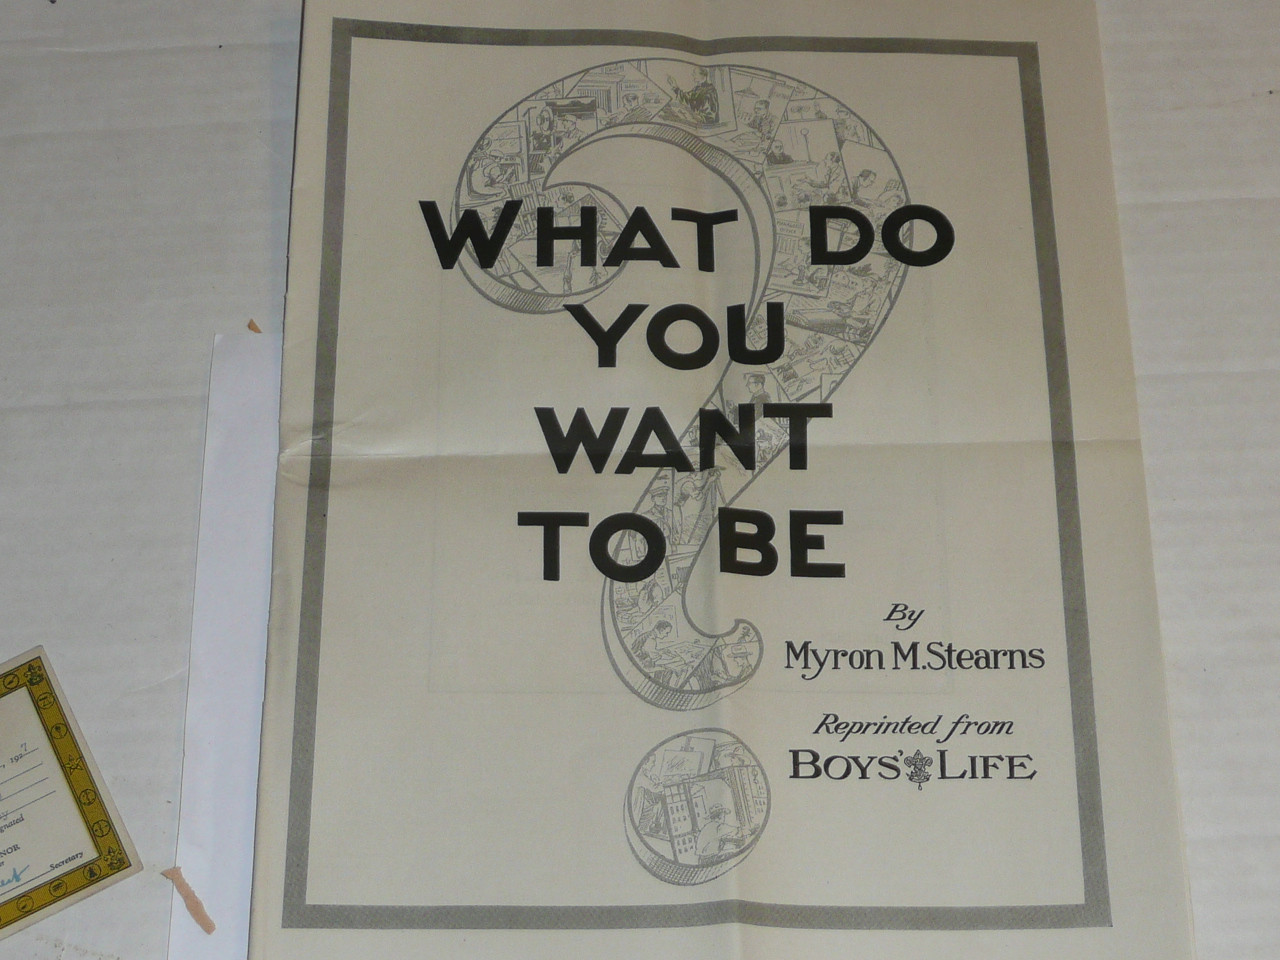 Boys' Life Reprint dated April 1929 titled "What do you Want to Be", 14 pages